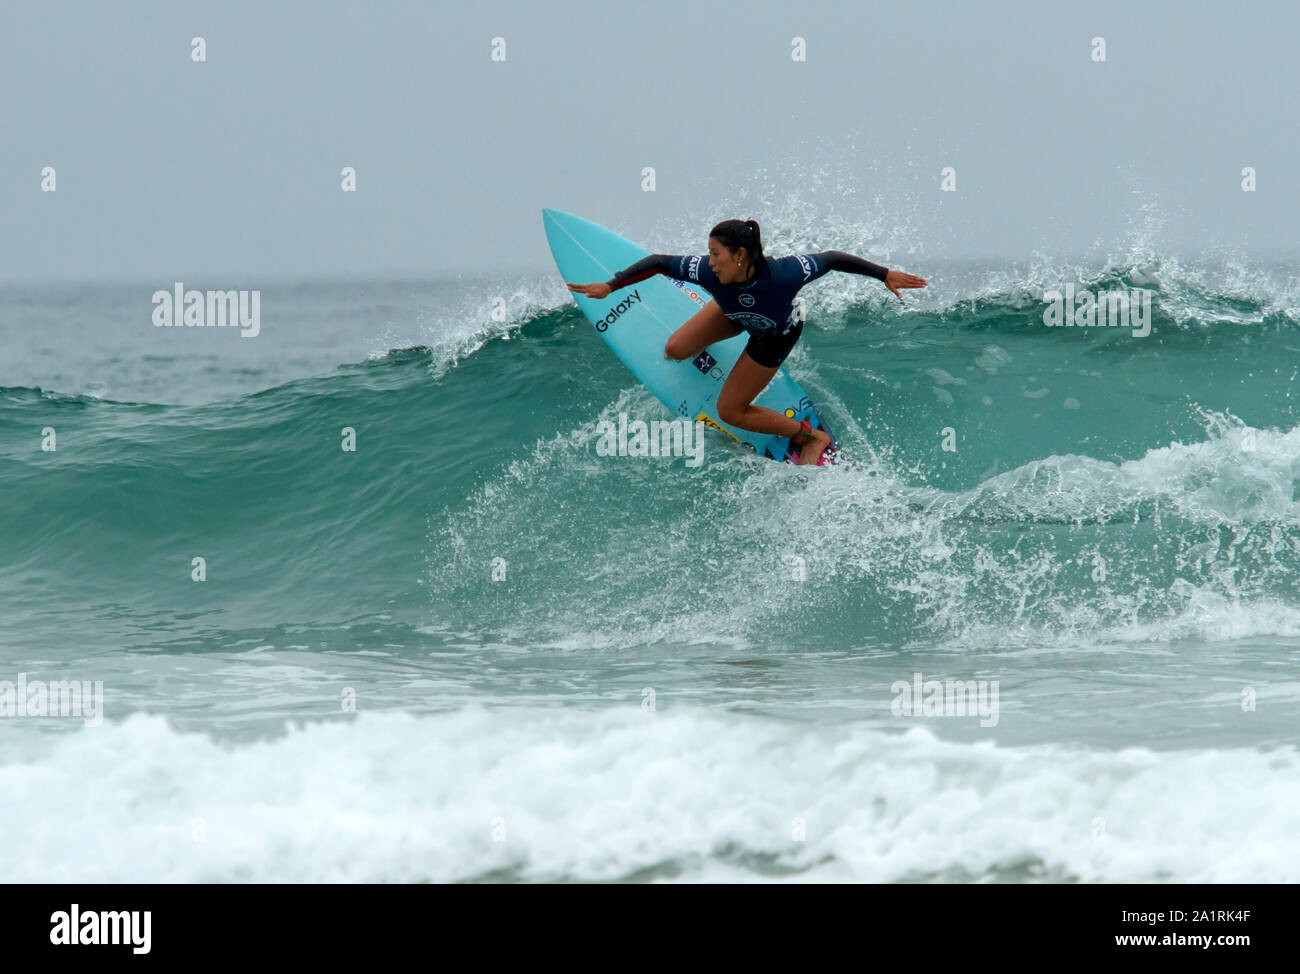 Pro surfer Mahina Maeda of Japan competing at the 2019 US Open on Surfing Stock Photo